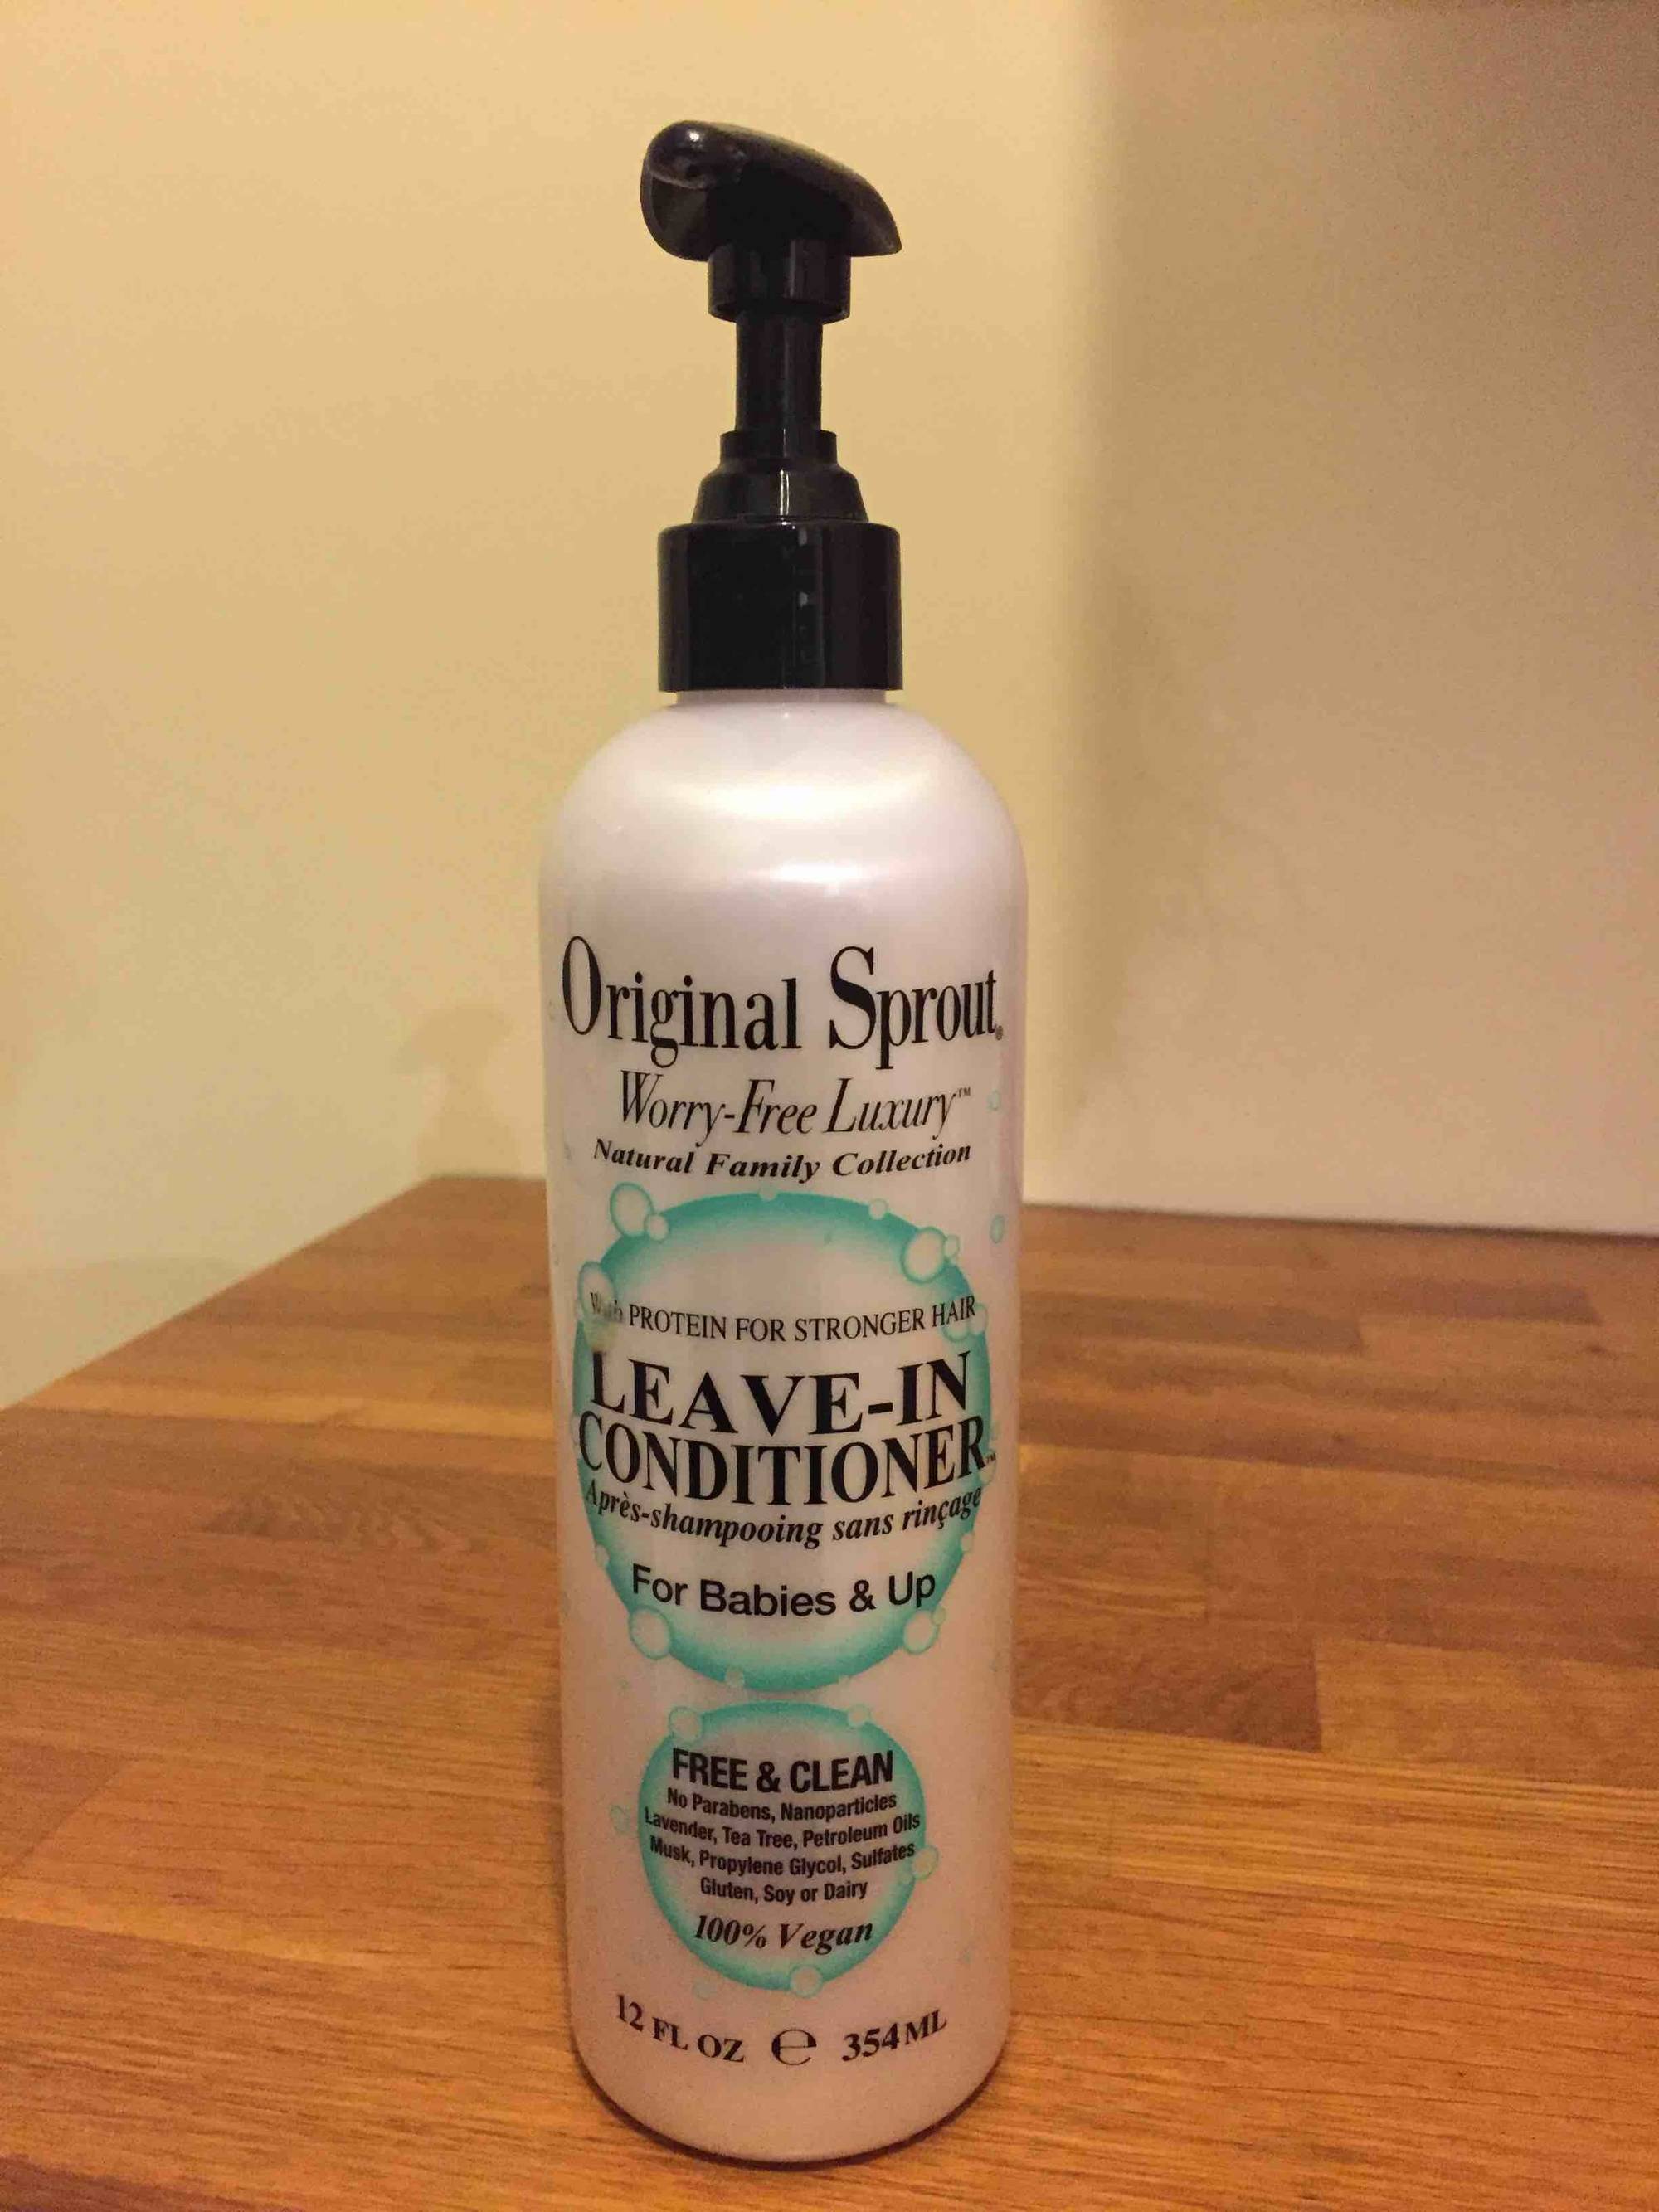 ORIGINAL SPROUT - Leave-In Conditioner - Après-shampooing sans rinçage